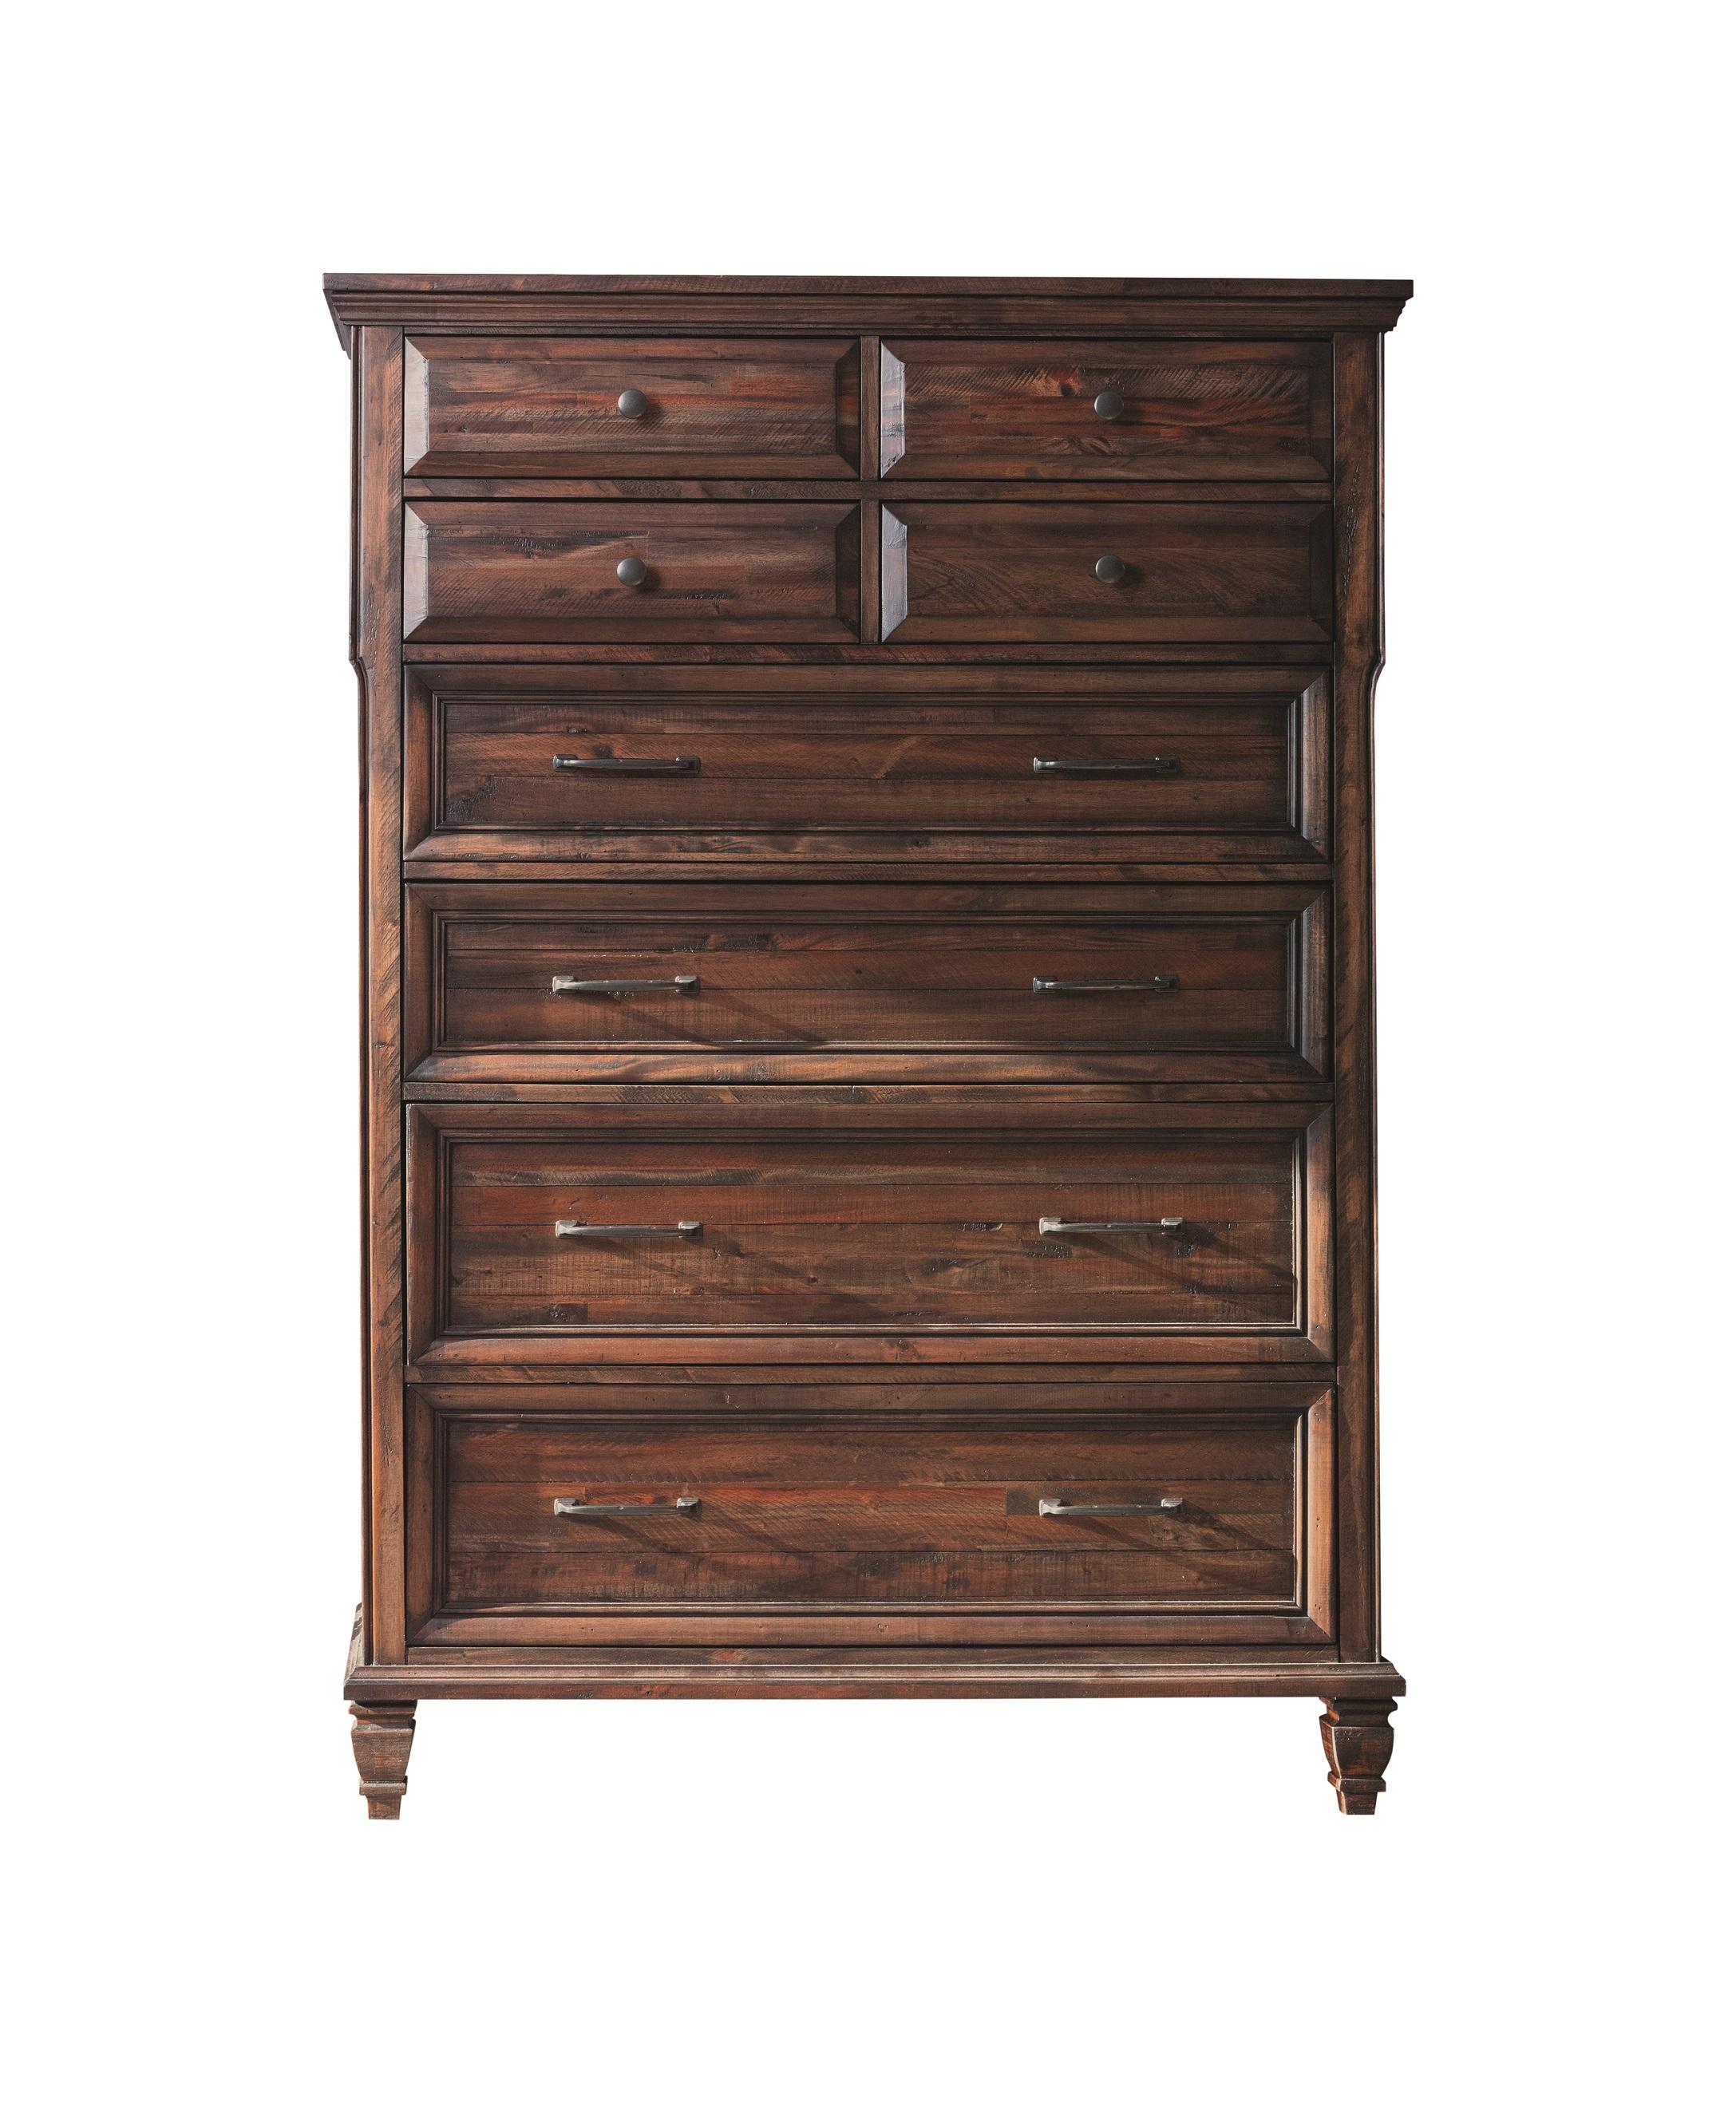 Traditional Chest 223035 Avenue 223035 in Brown 